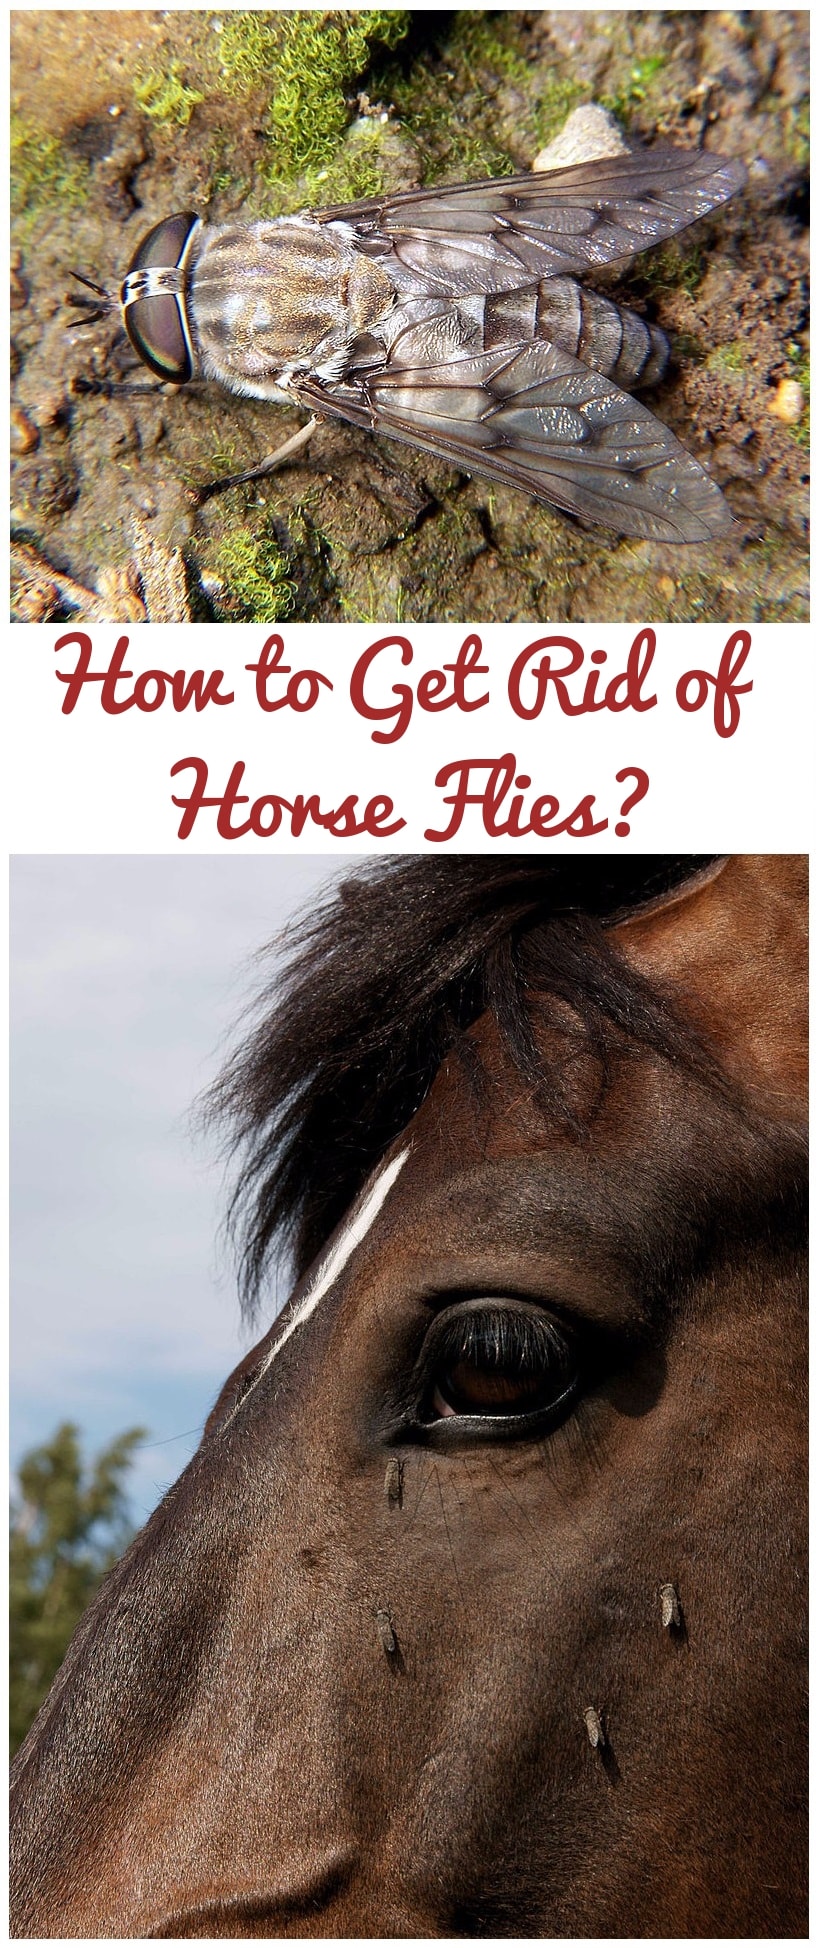 How to Get Rid of Horse Flies?